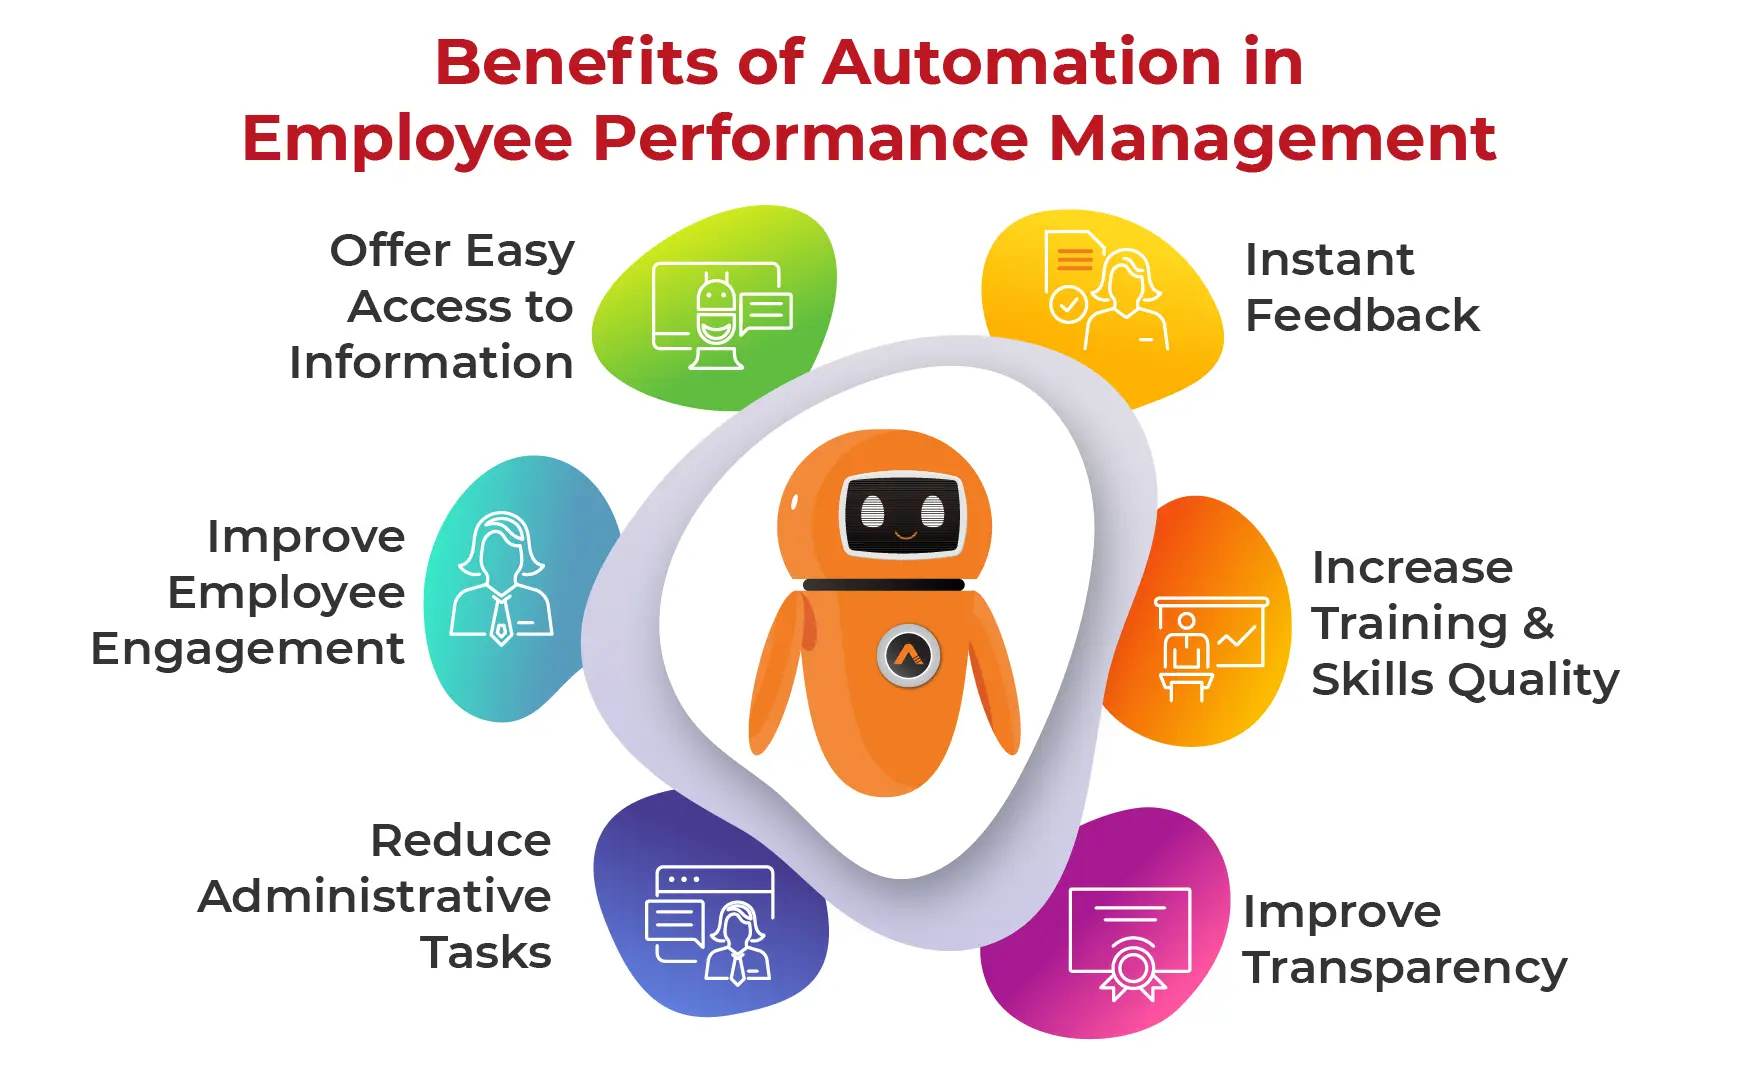 Benefits of Automation in Employee Performance Management